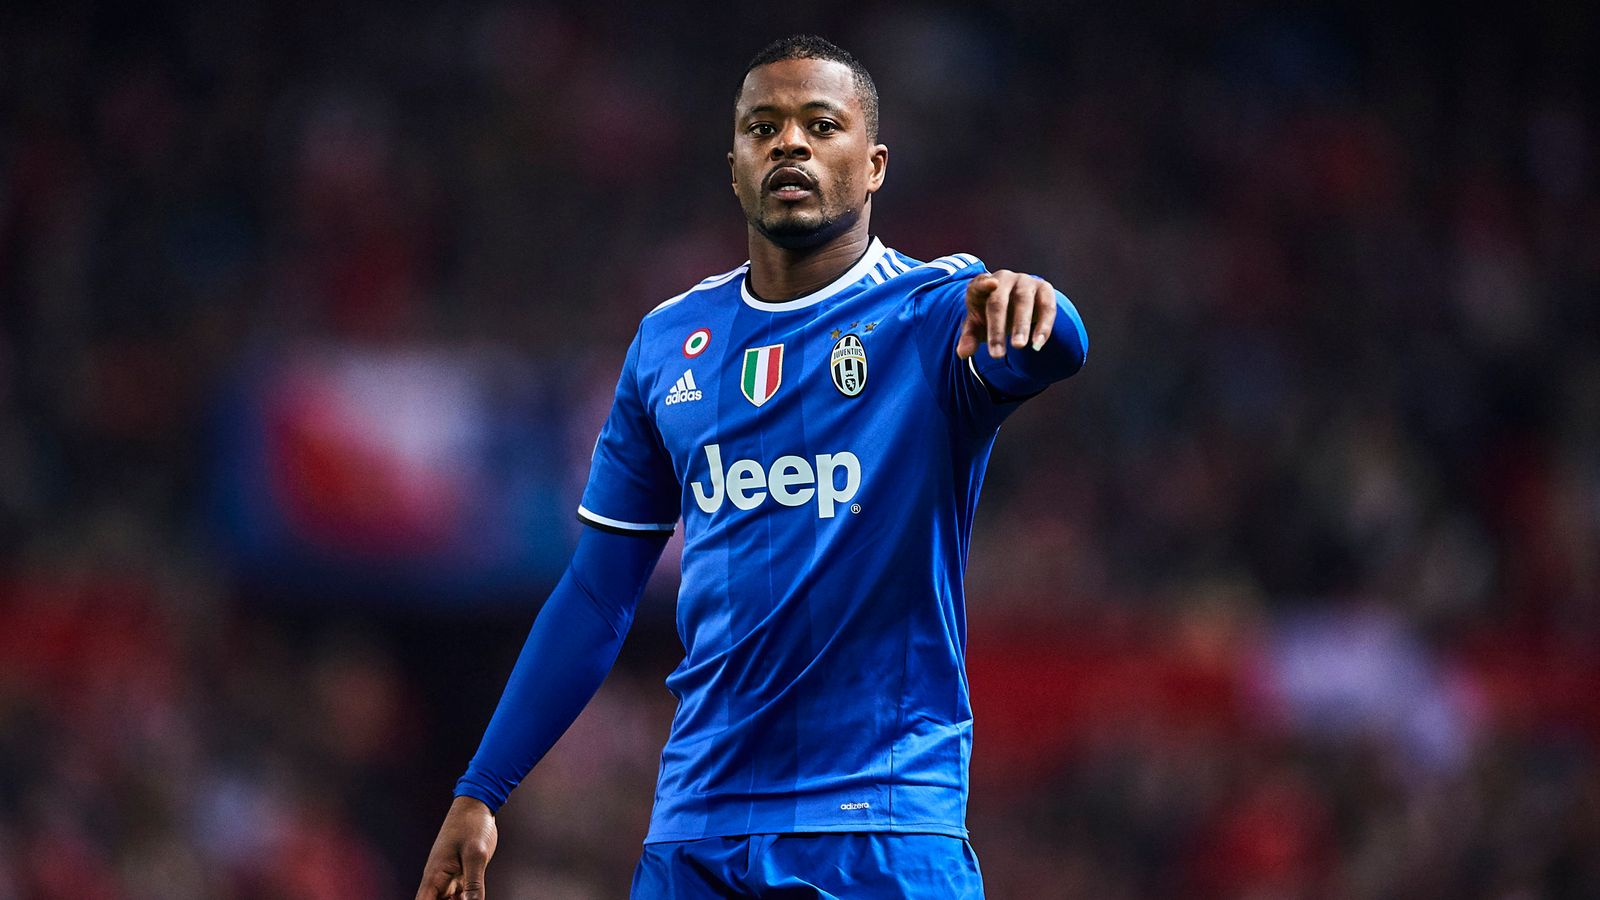  Patrice Evra gestures while playing in a Champions League final, which his team ultimately lost.